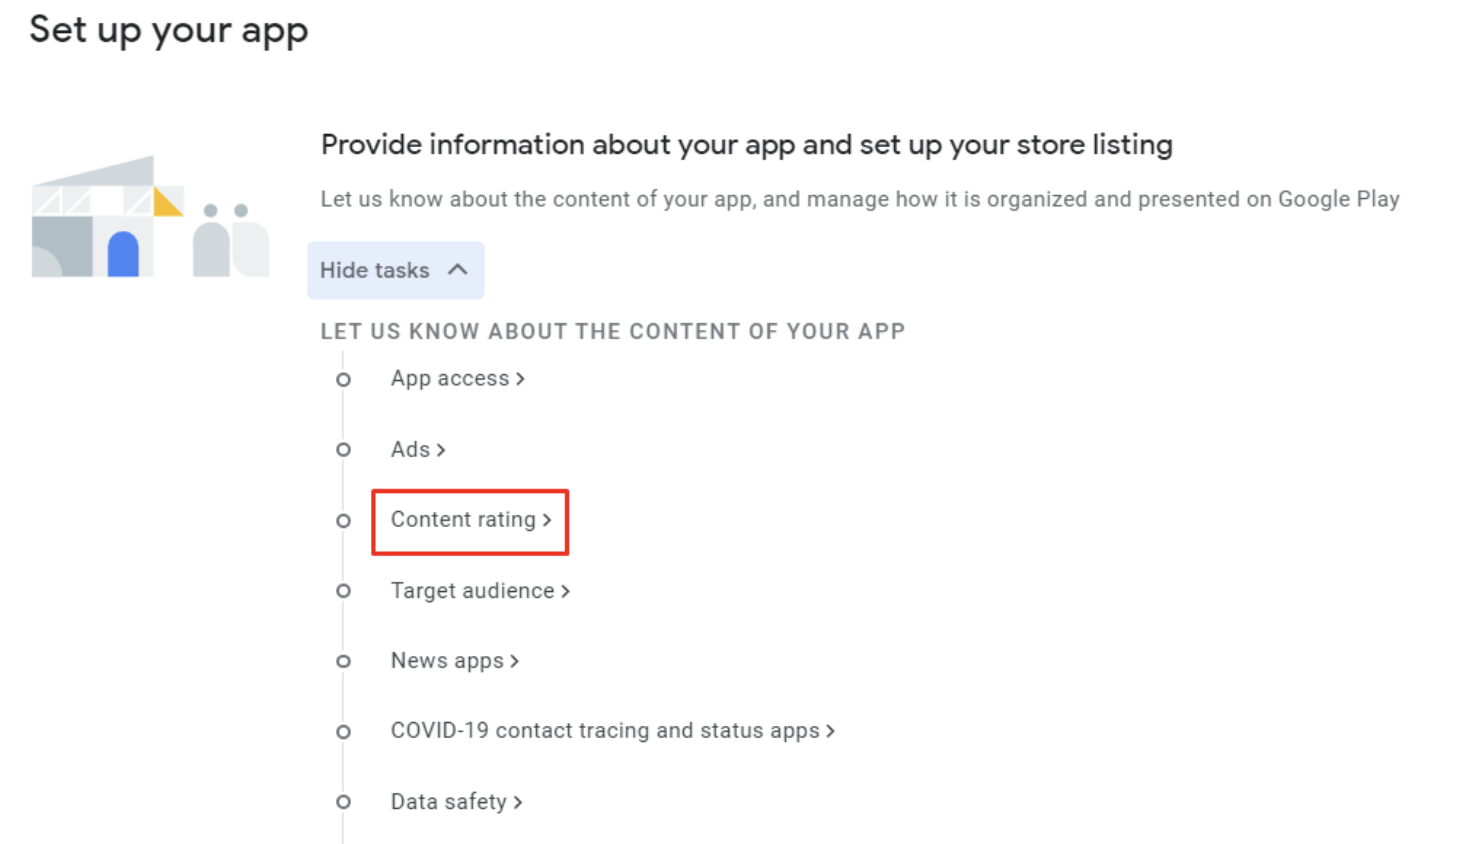 How To Submit An App To The Google Play Store?